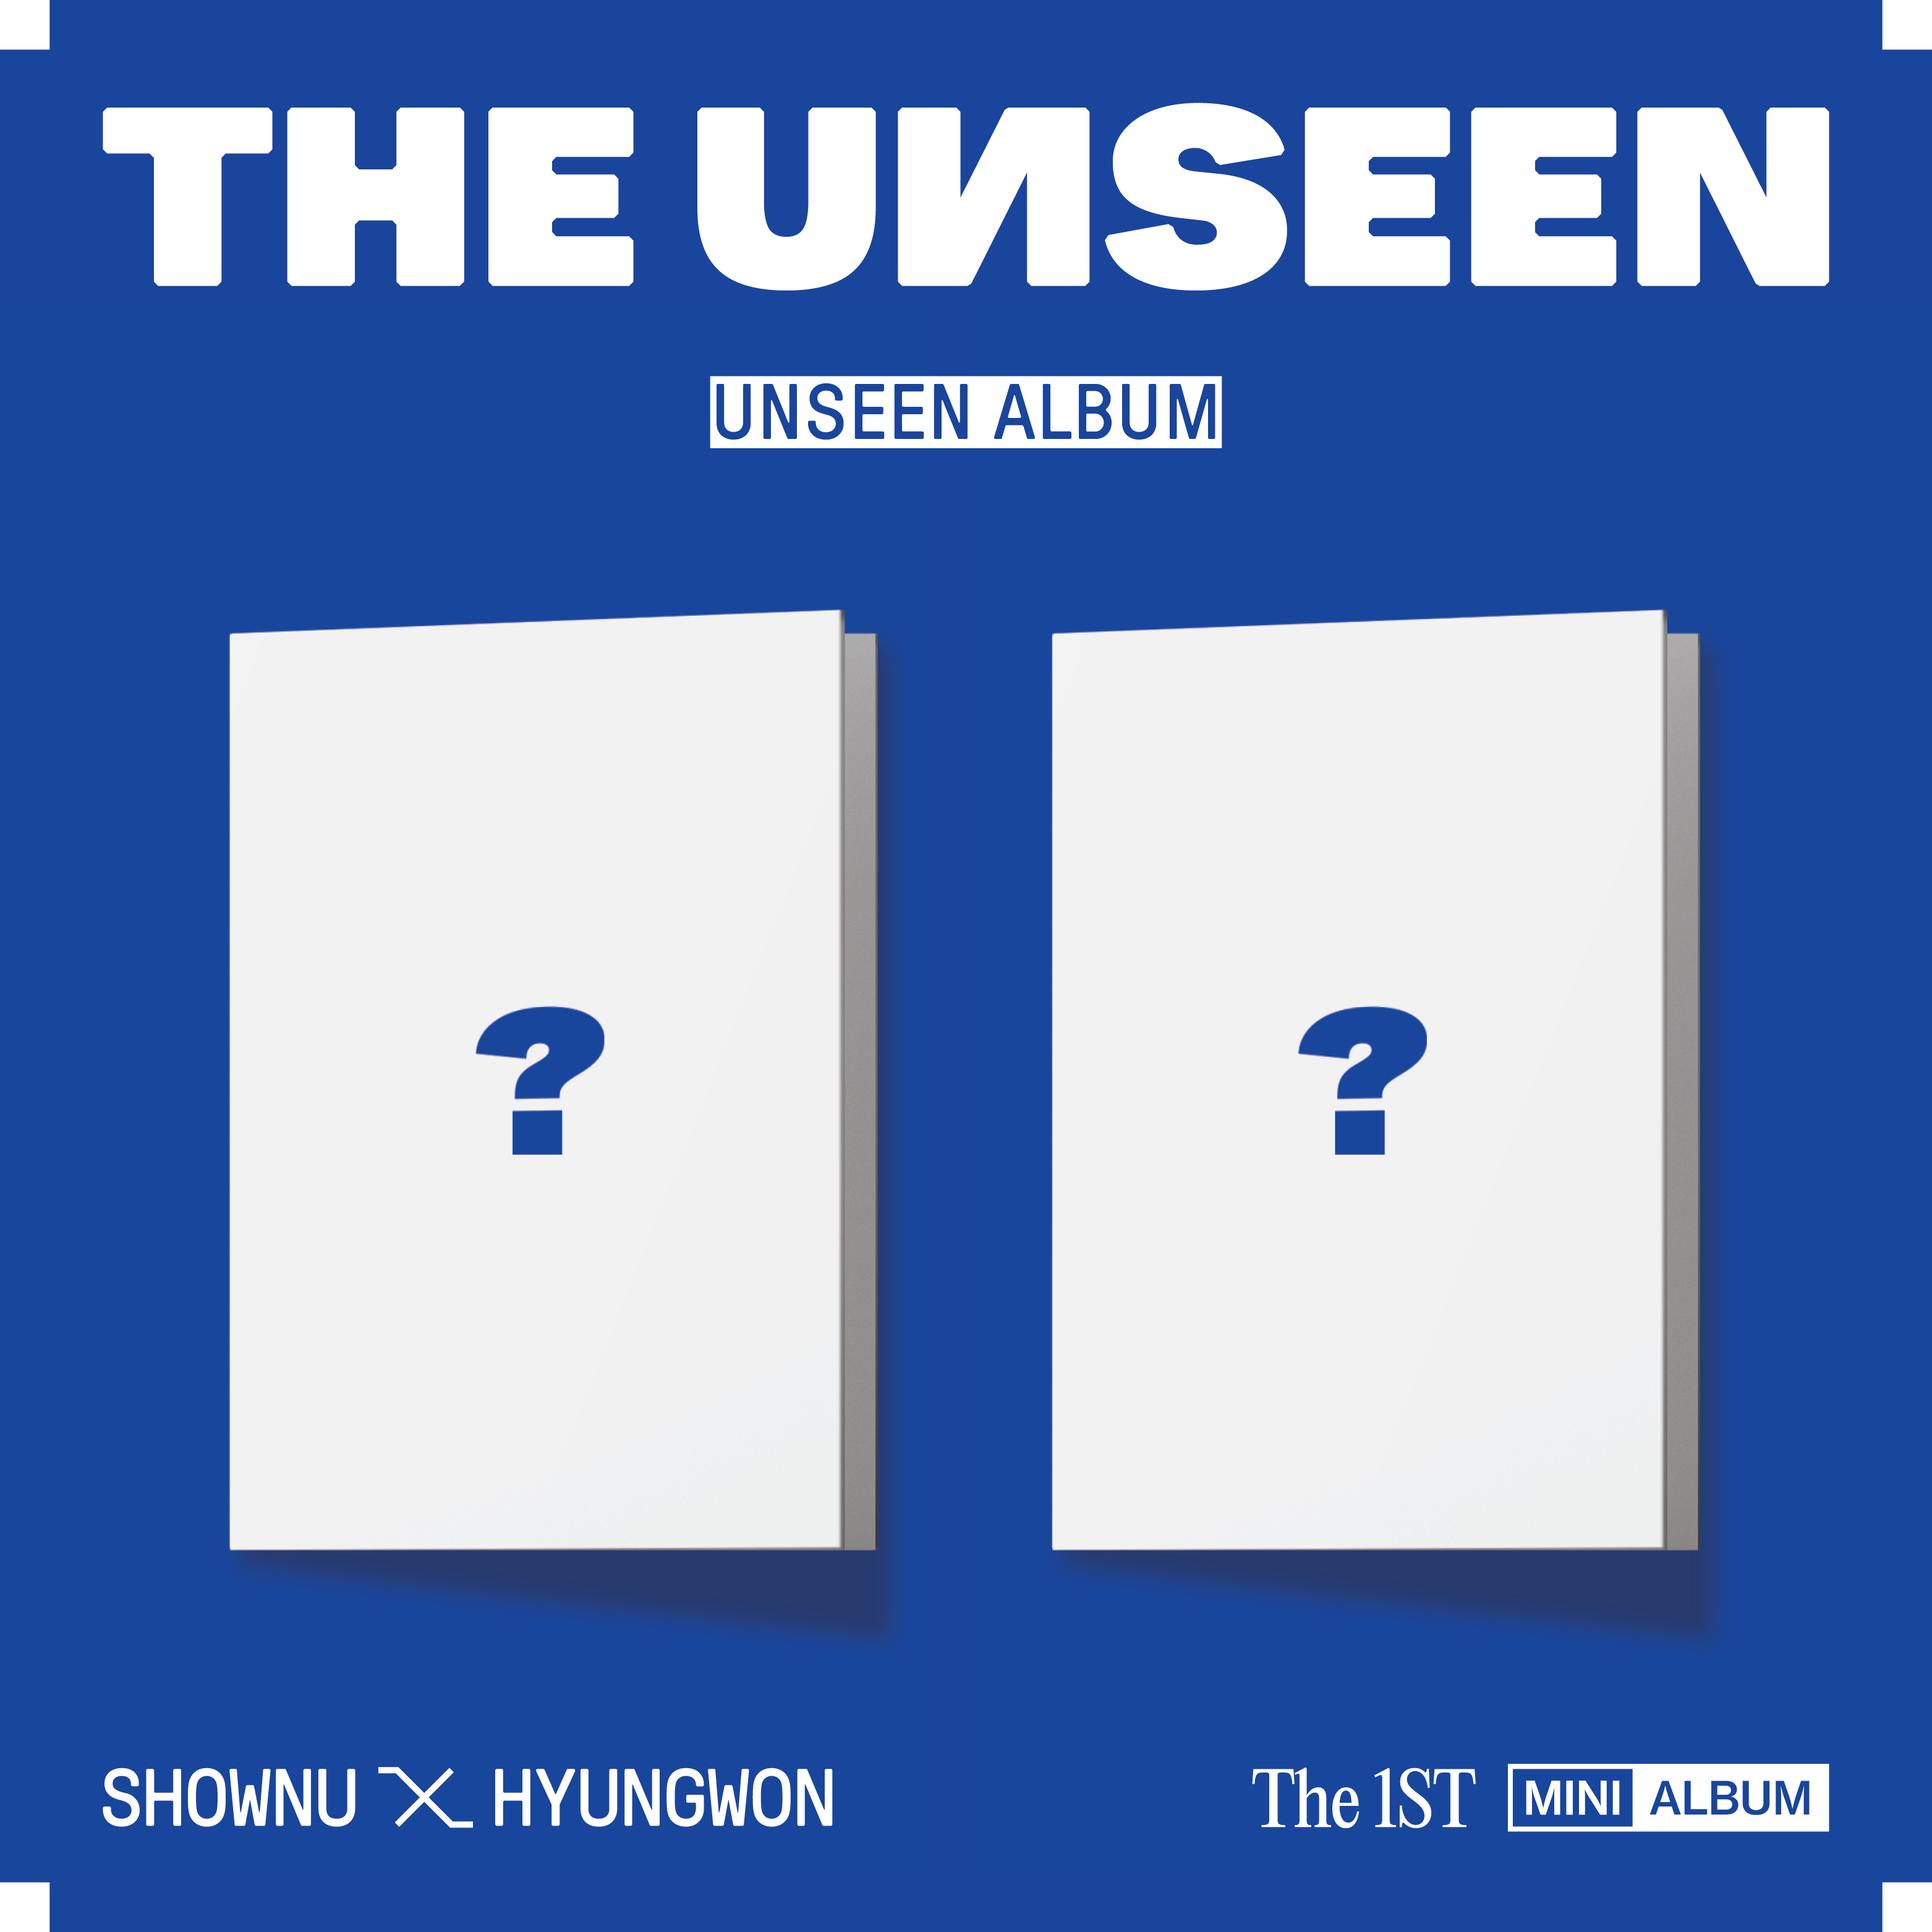 SHOWNU X HYUNGWON - The 1st Mini Album [THE UNSEEN] (UNSEEN ALBUM) (SEEN Ver.) (Limited Edition)